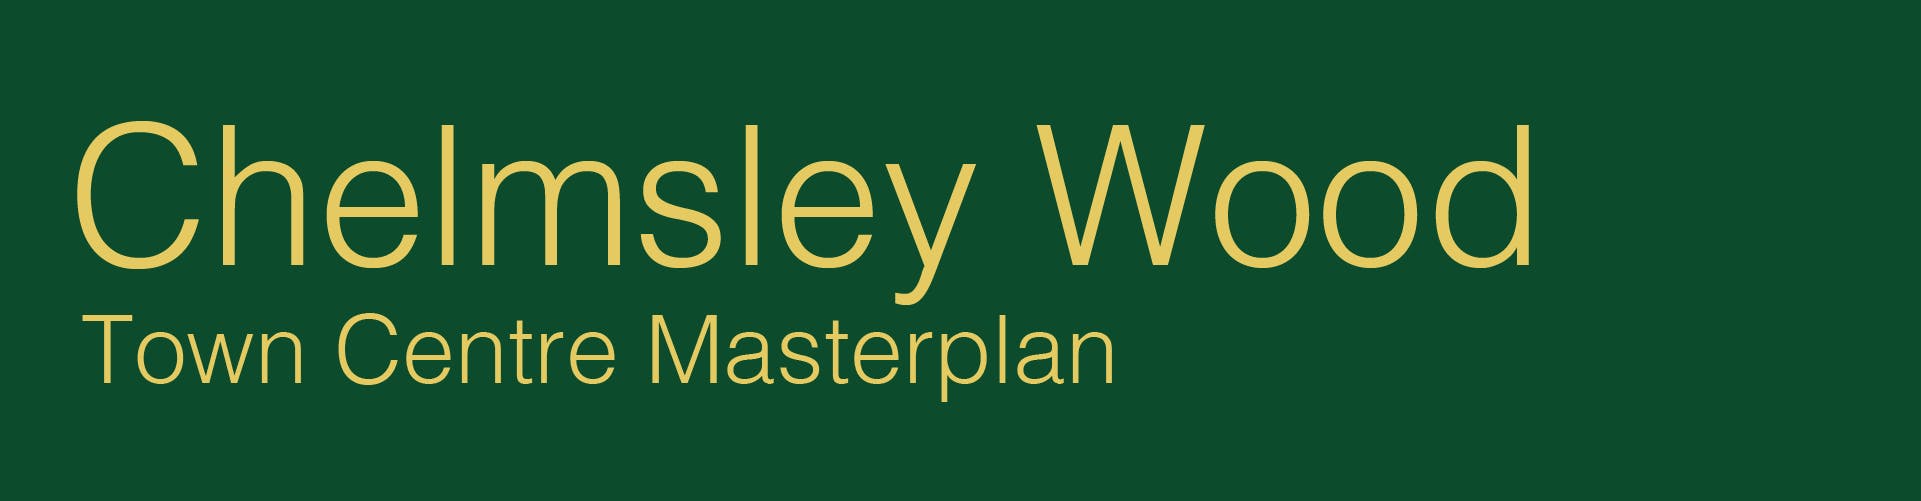 Banner showing Chelmsley Wood Town Centre Masterplan logo